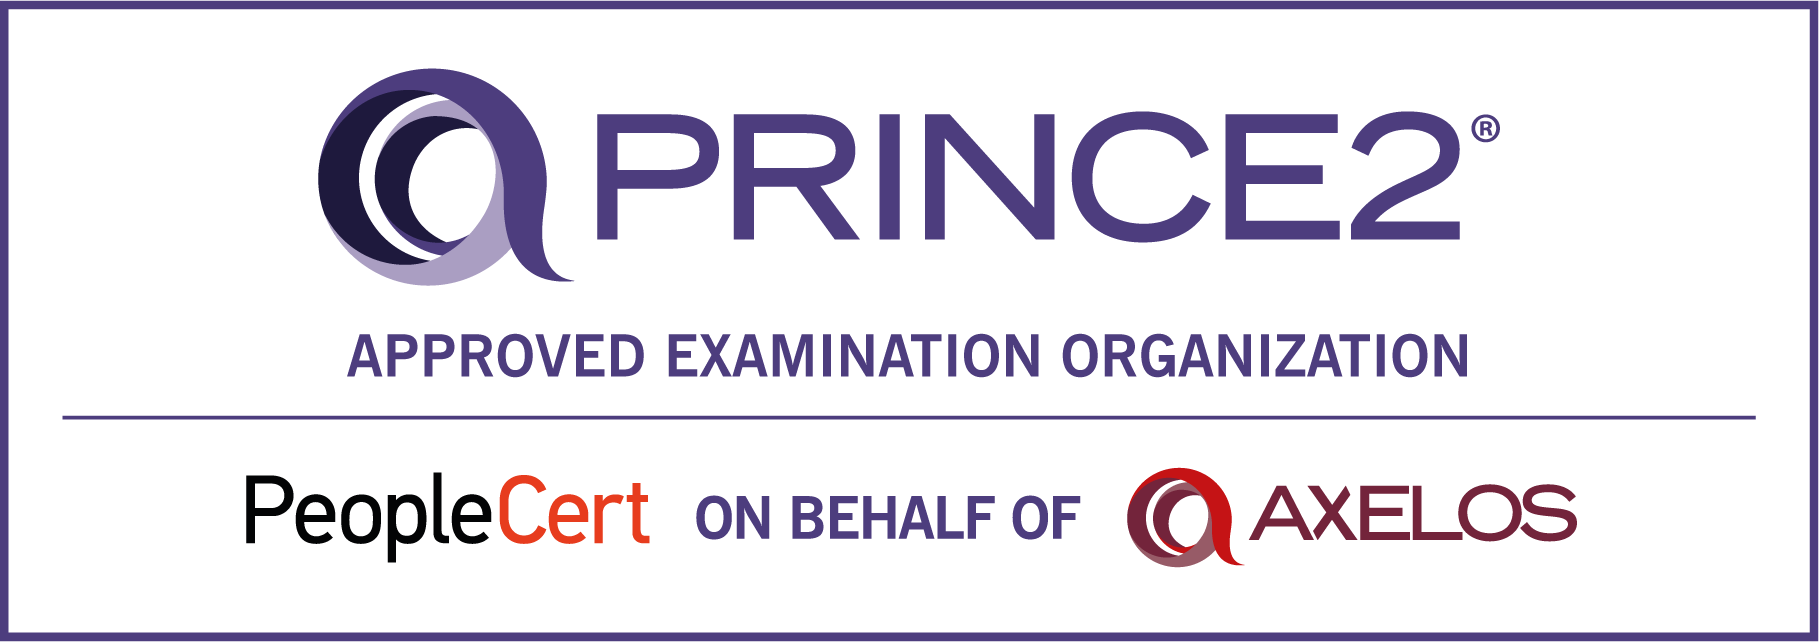 formation PRINCE2